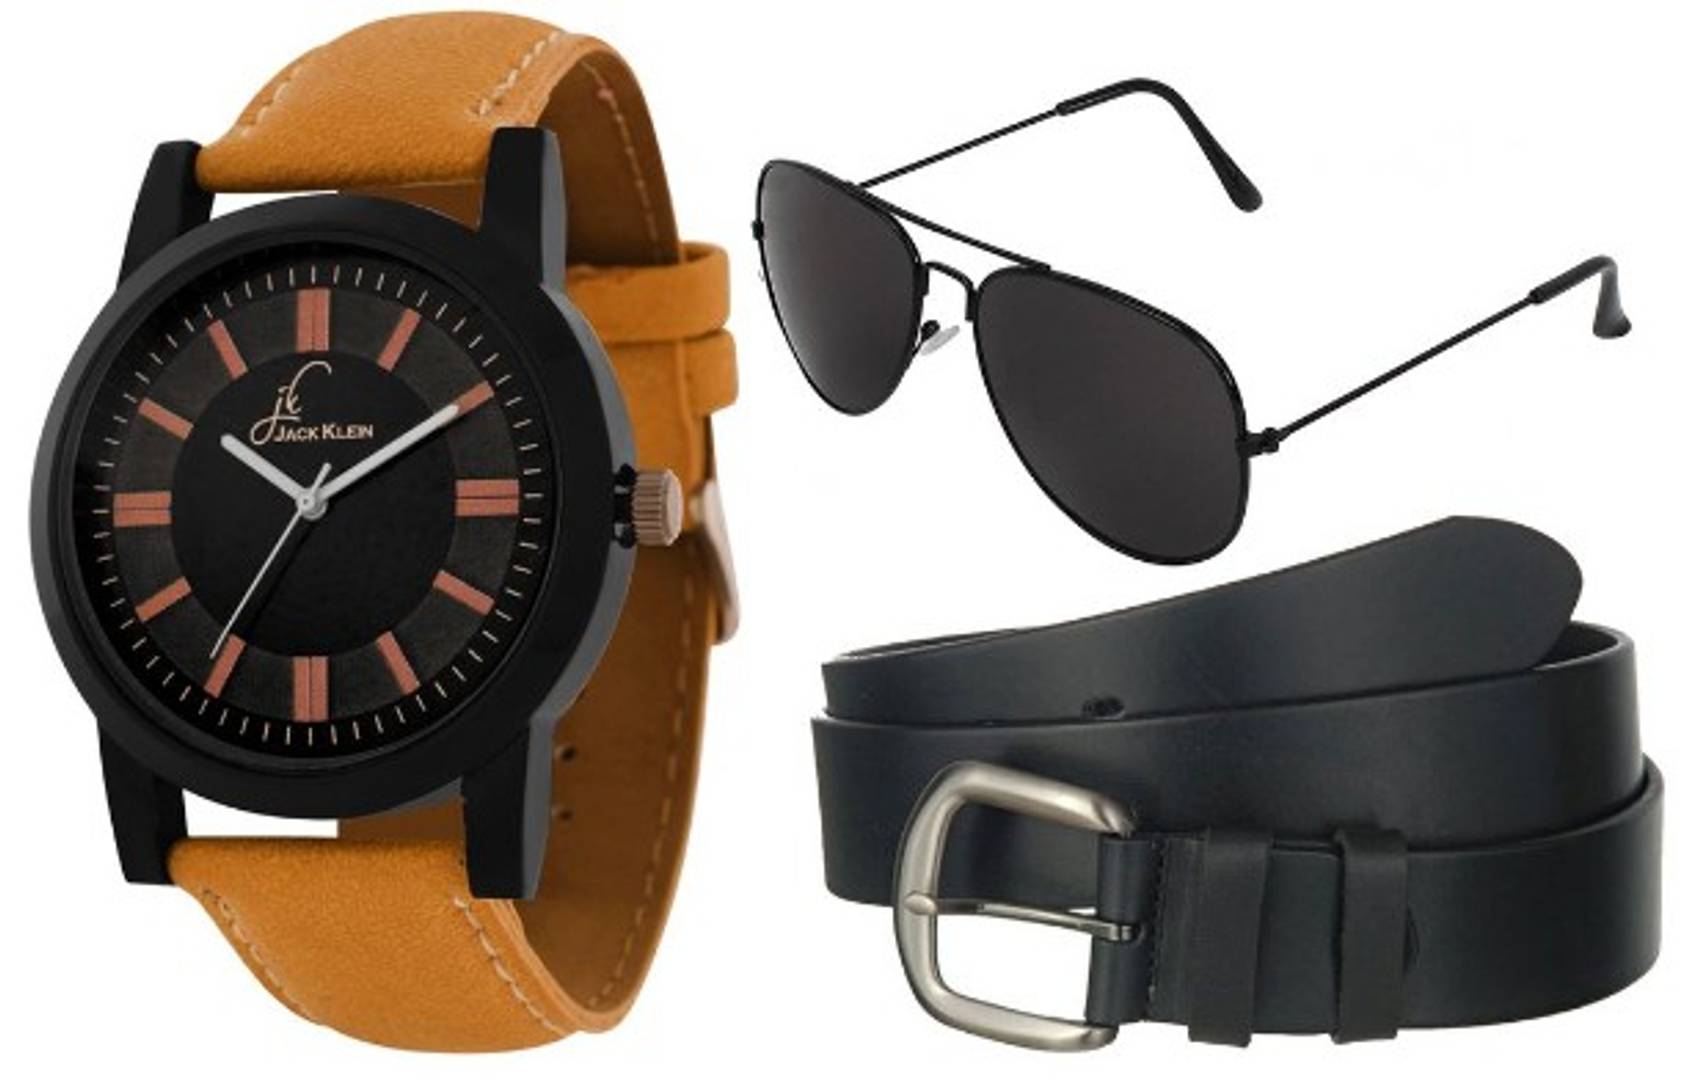 Stylish Round  Dial Premium Quality Graphic Watch With  Belt And Aviator Glasses